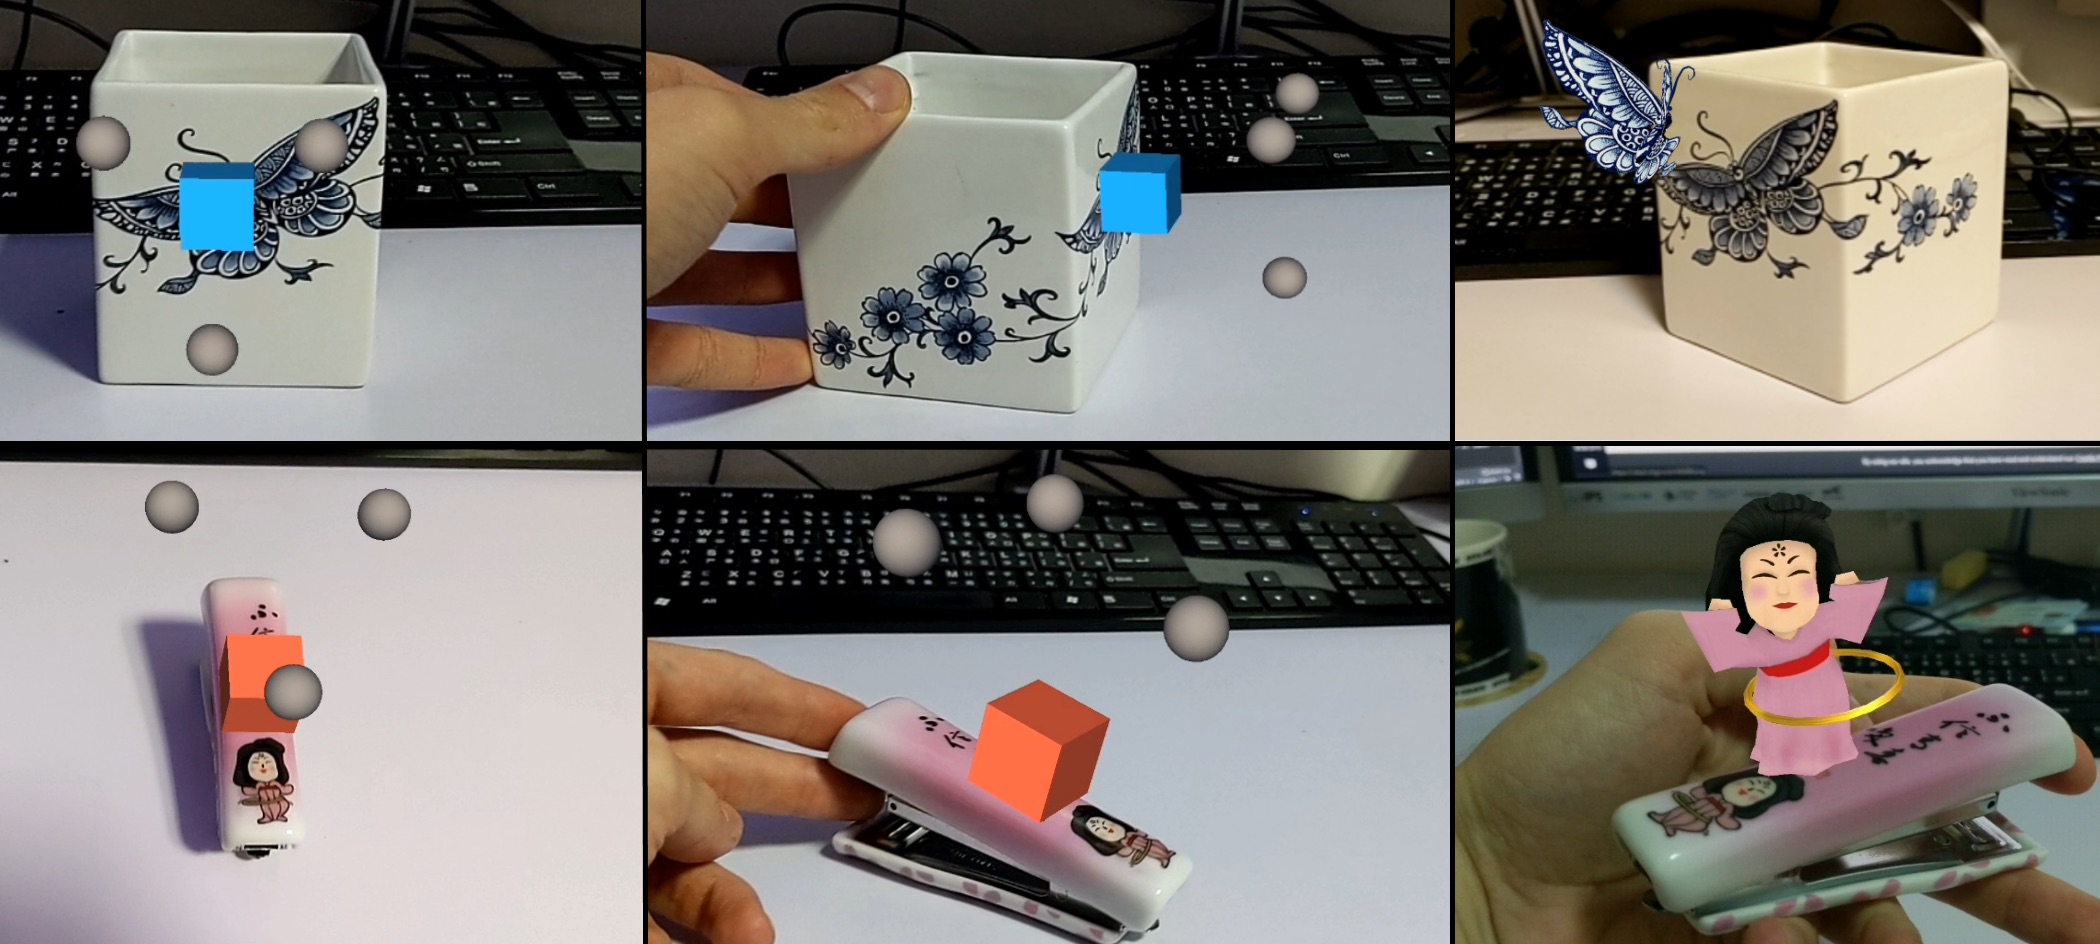 Augmented Reality SDK for Real Time Image Target Recognition and 3D Object Tracking